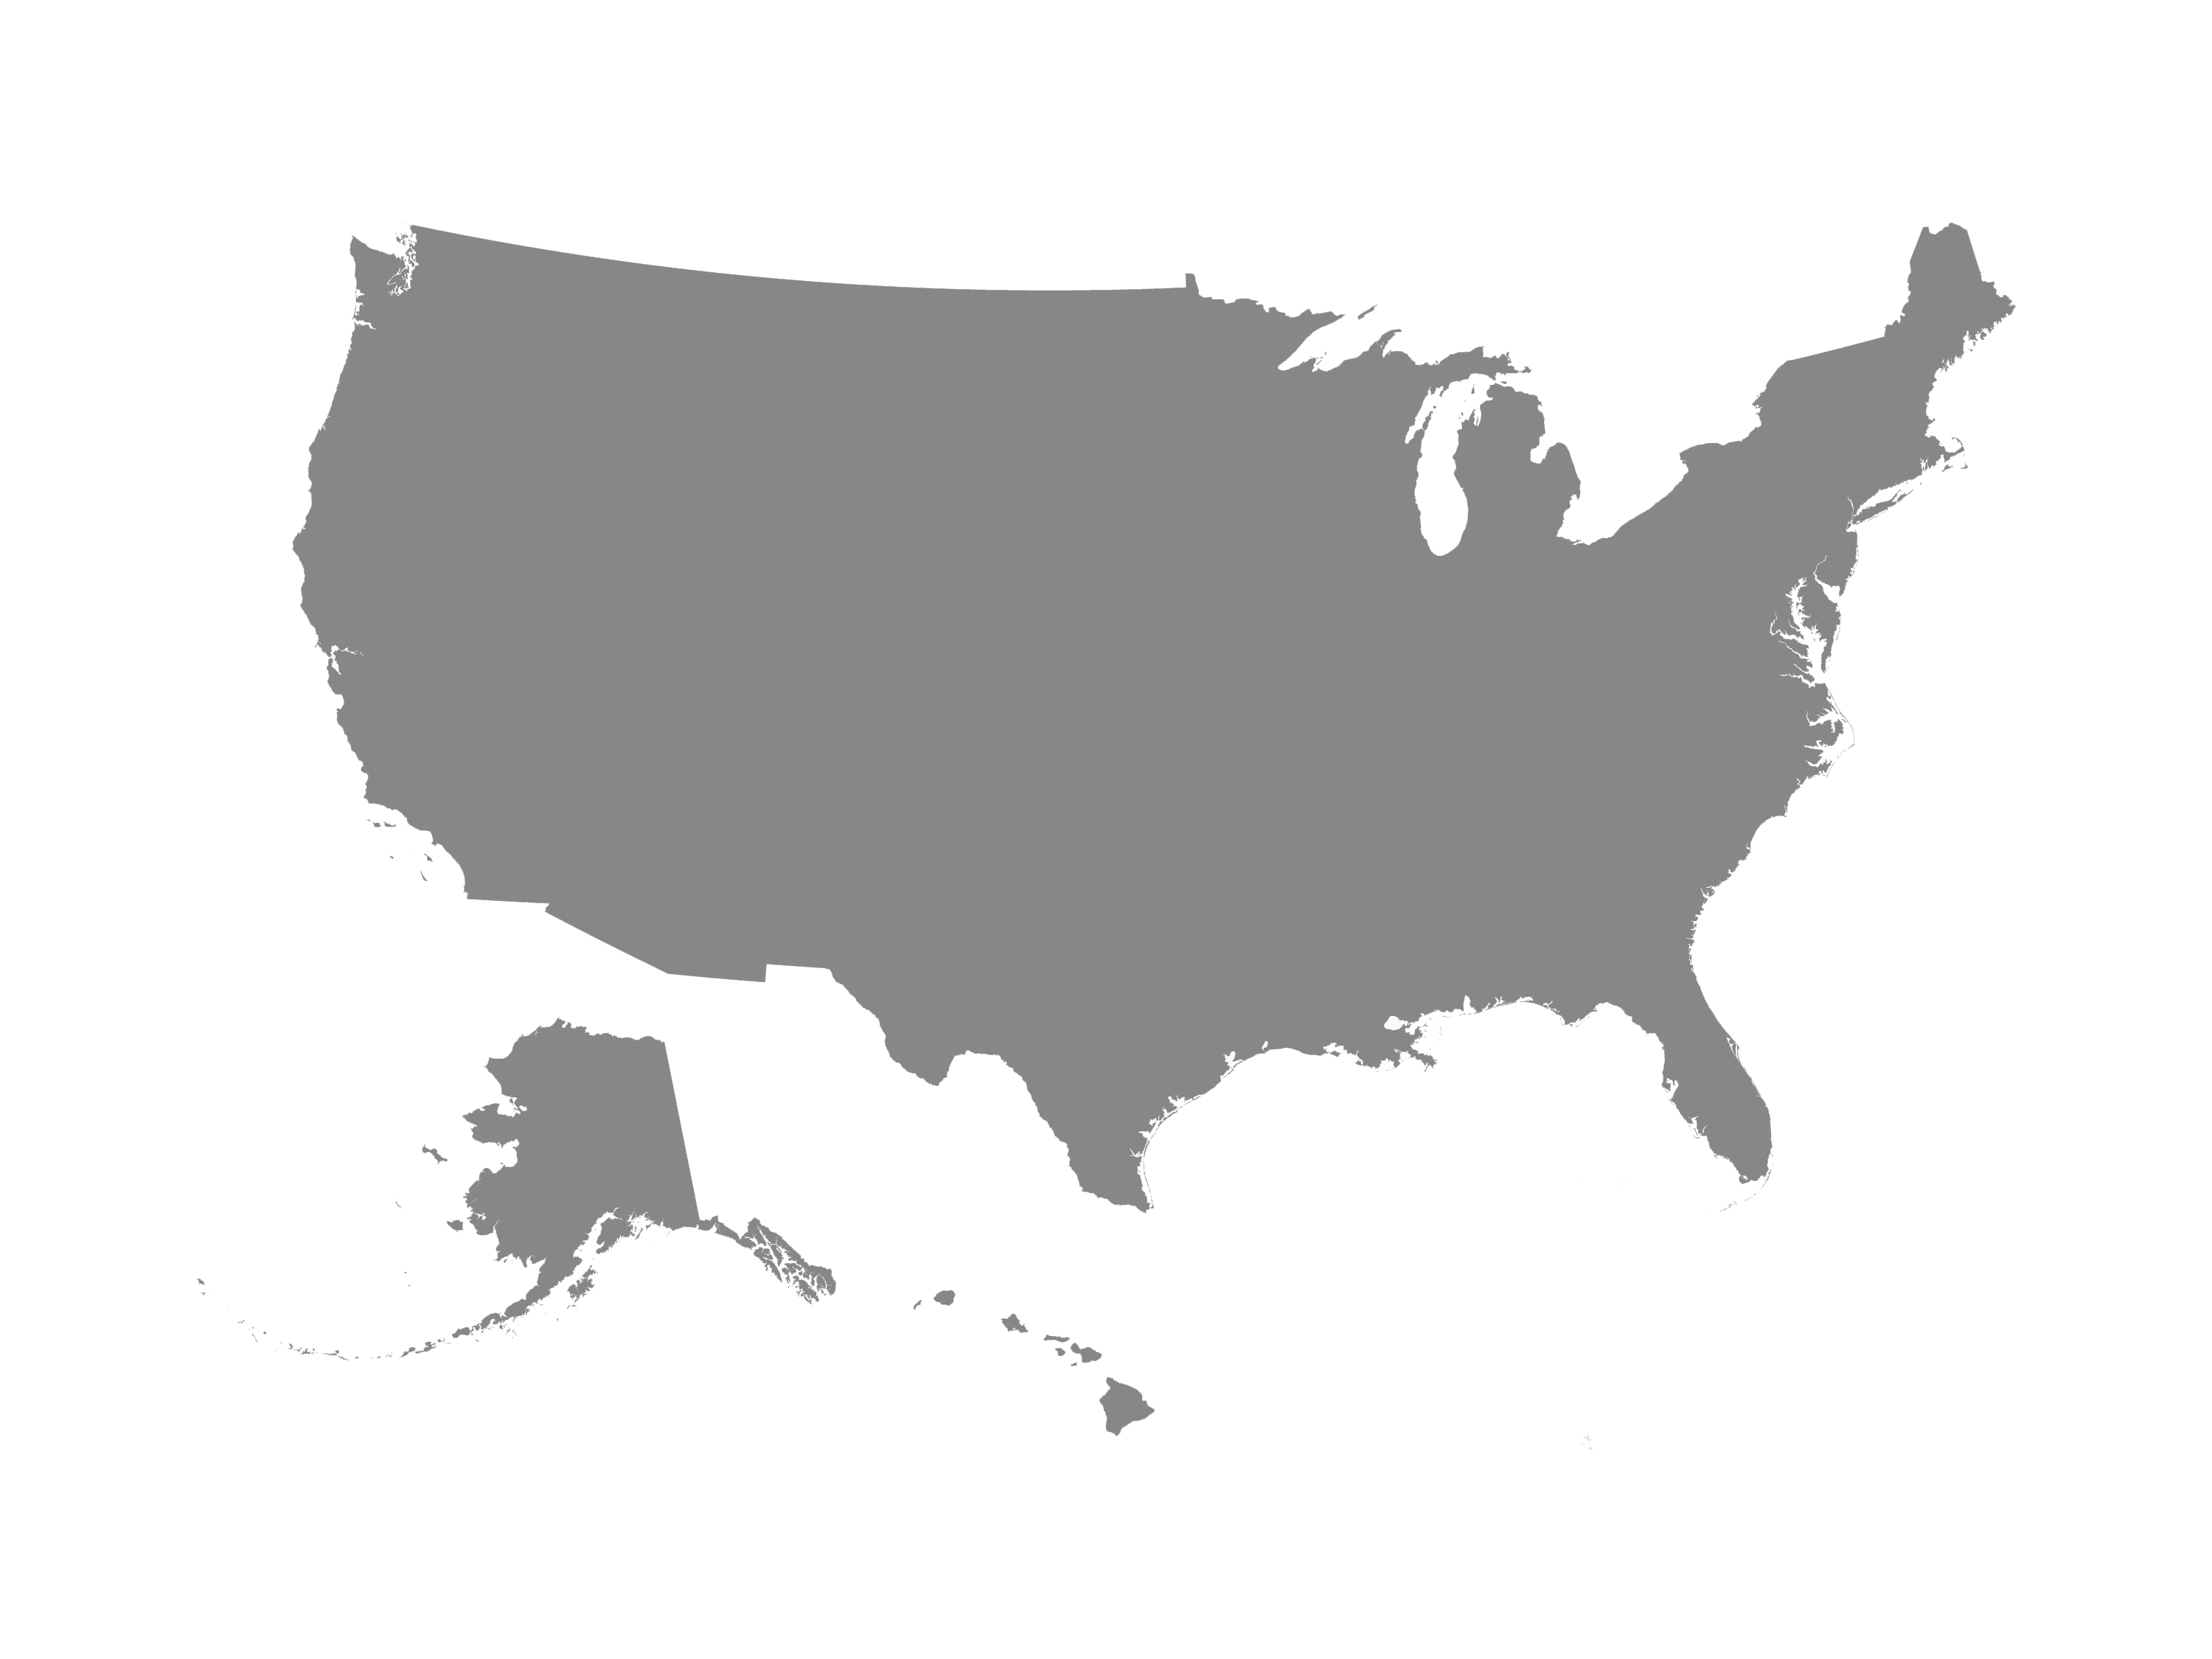 United States of America - Single Color by FreeVectorMaps.com